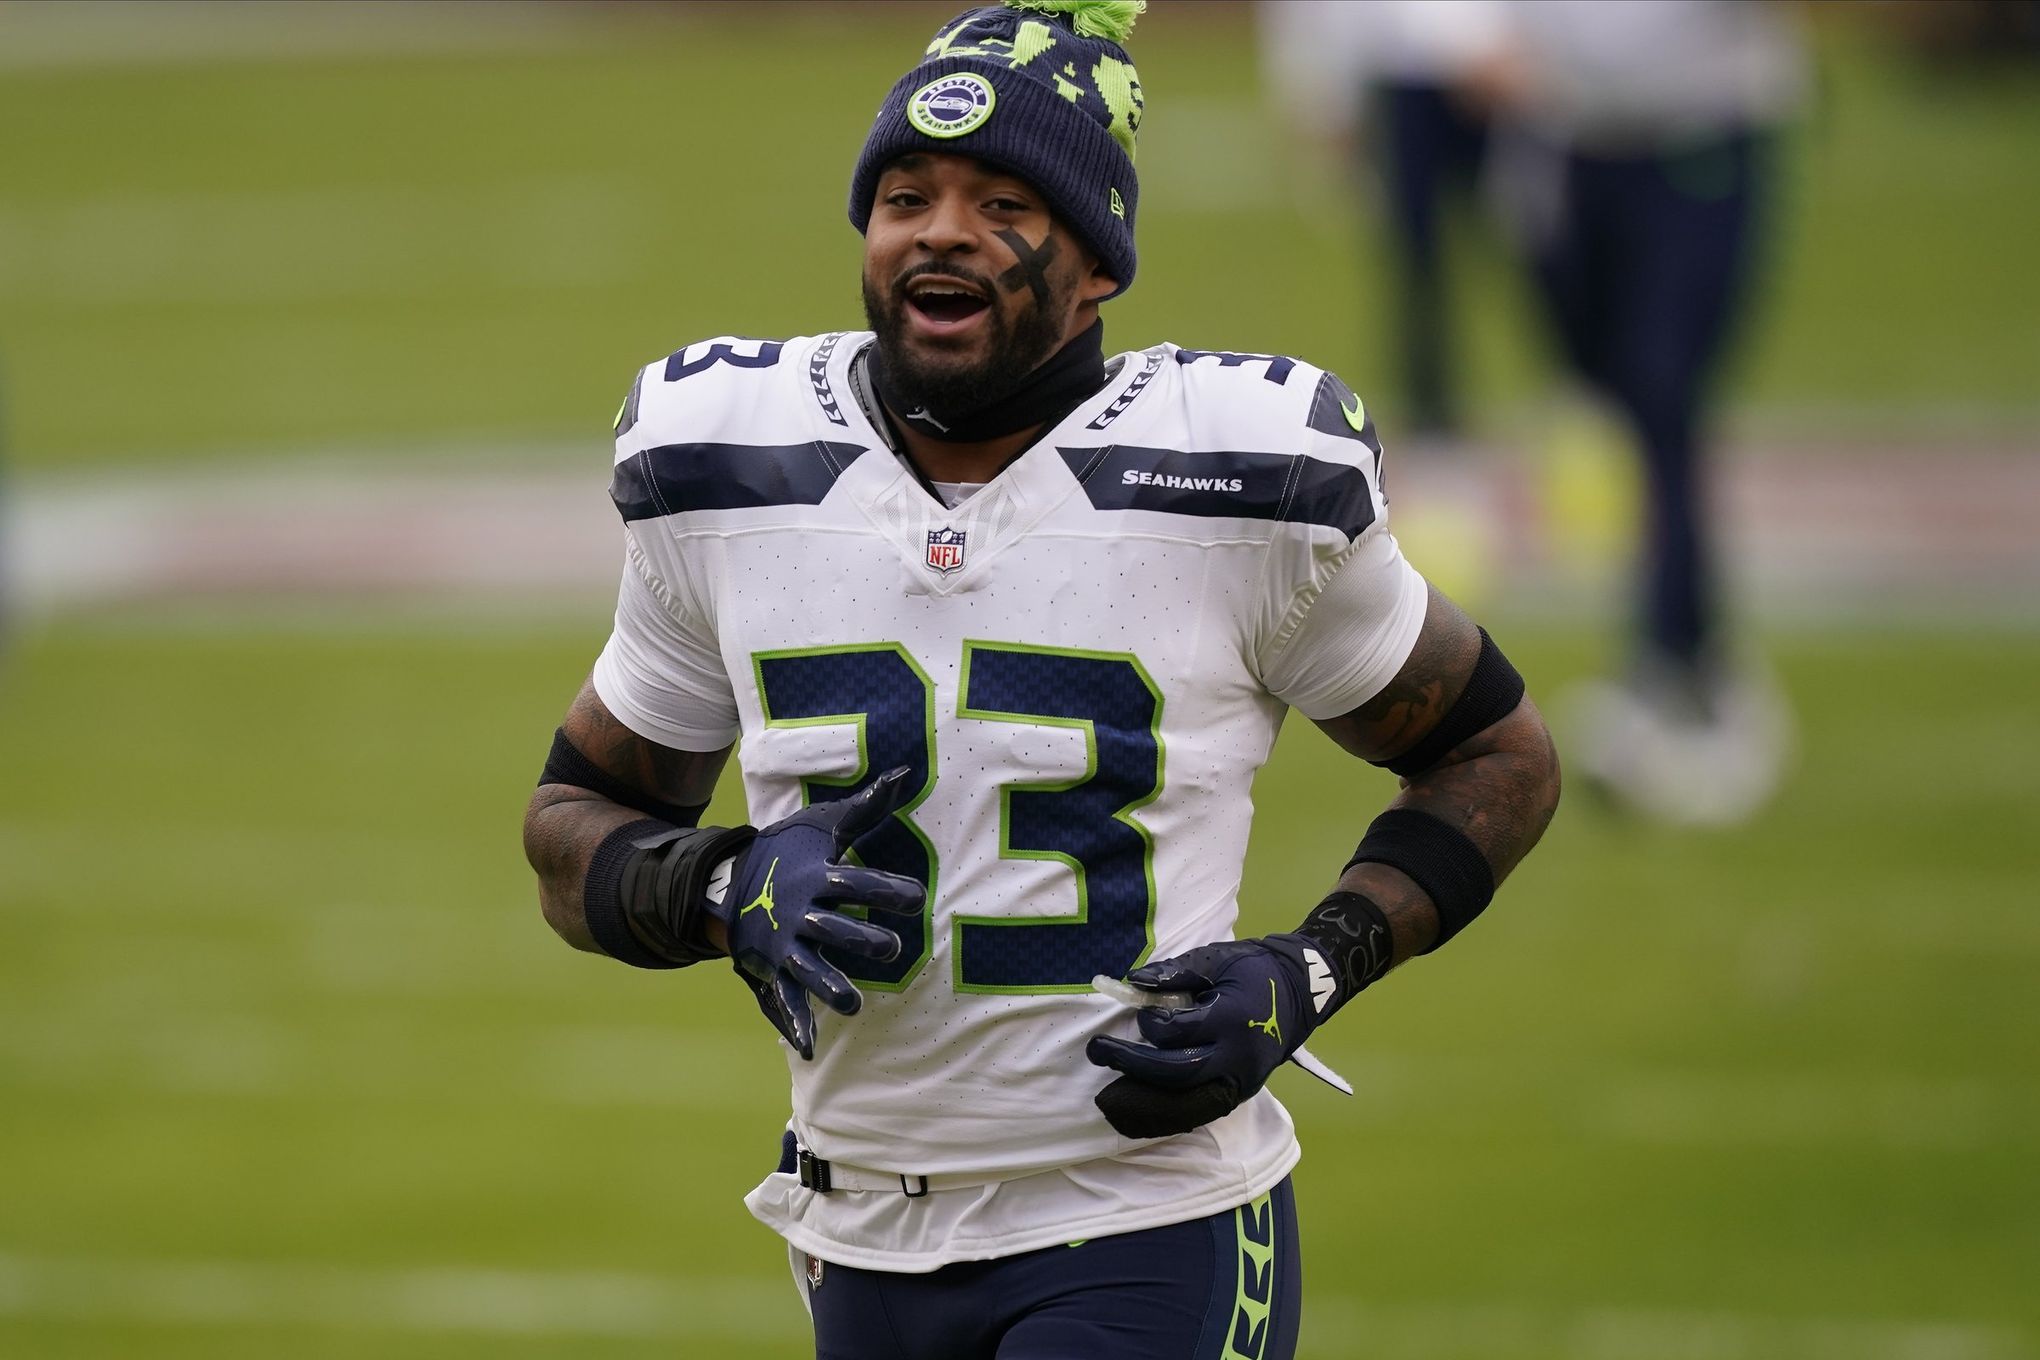 Should the Seahawks consider another big trade? « Seahawks Draft Blog